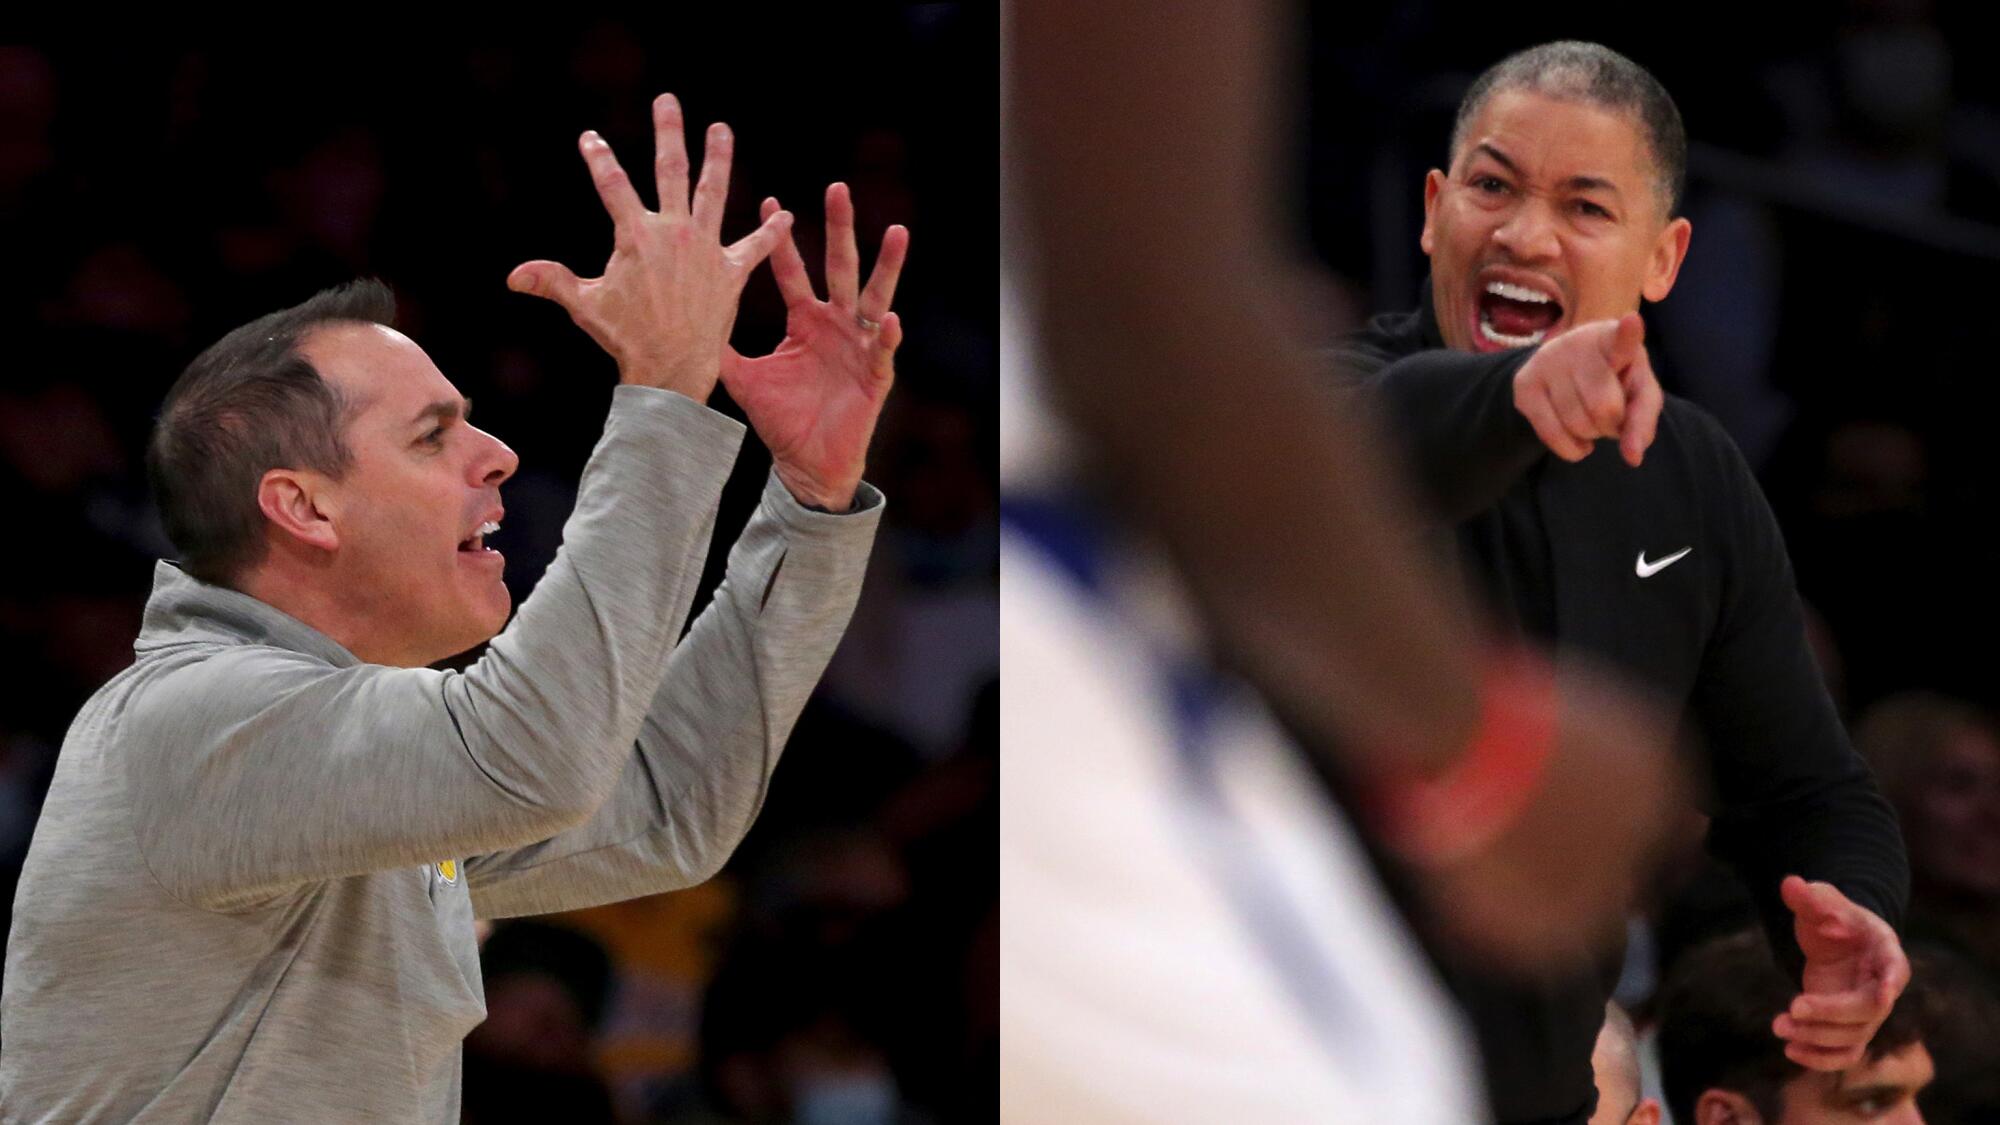 Lakers coach Frank Vogel and Clippers coach Tyronn Lue react during Friday's game.